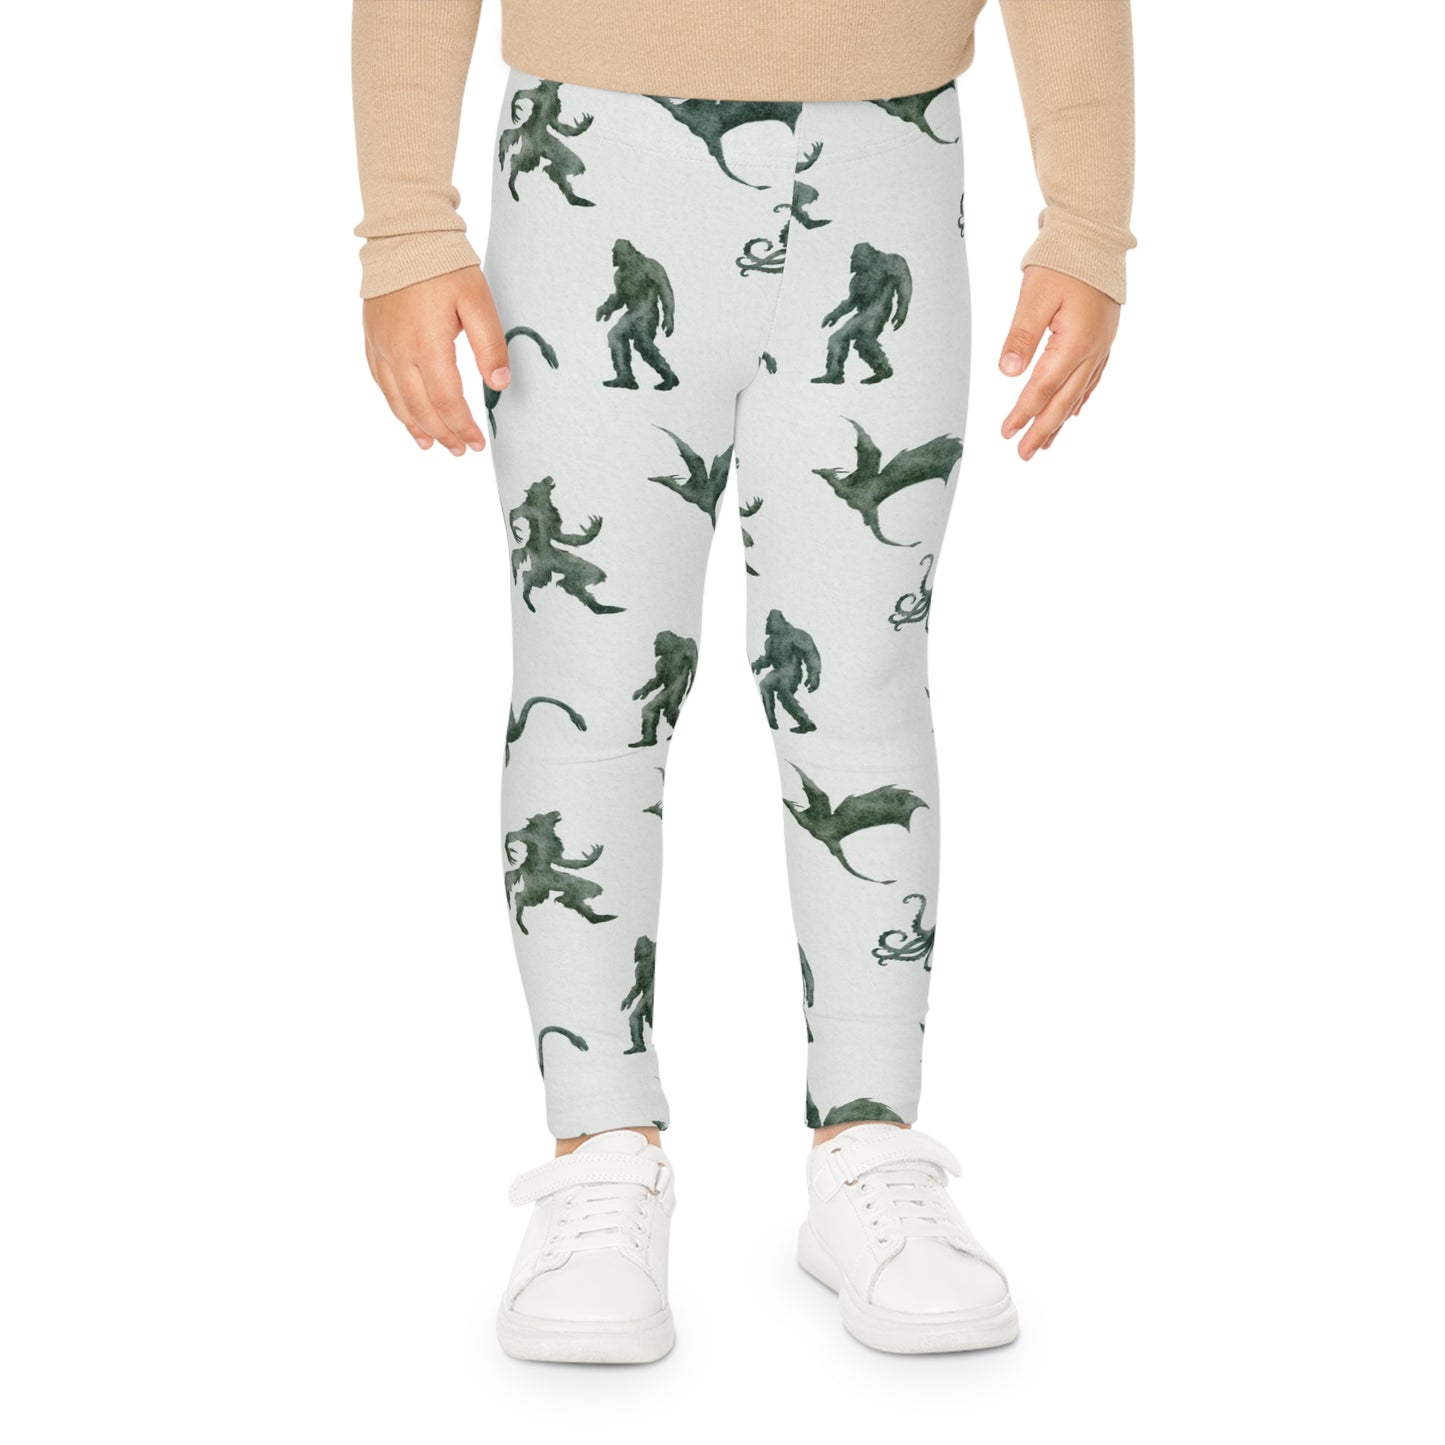 Mythical Creatures Kids Leggings